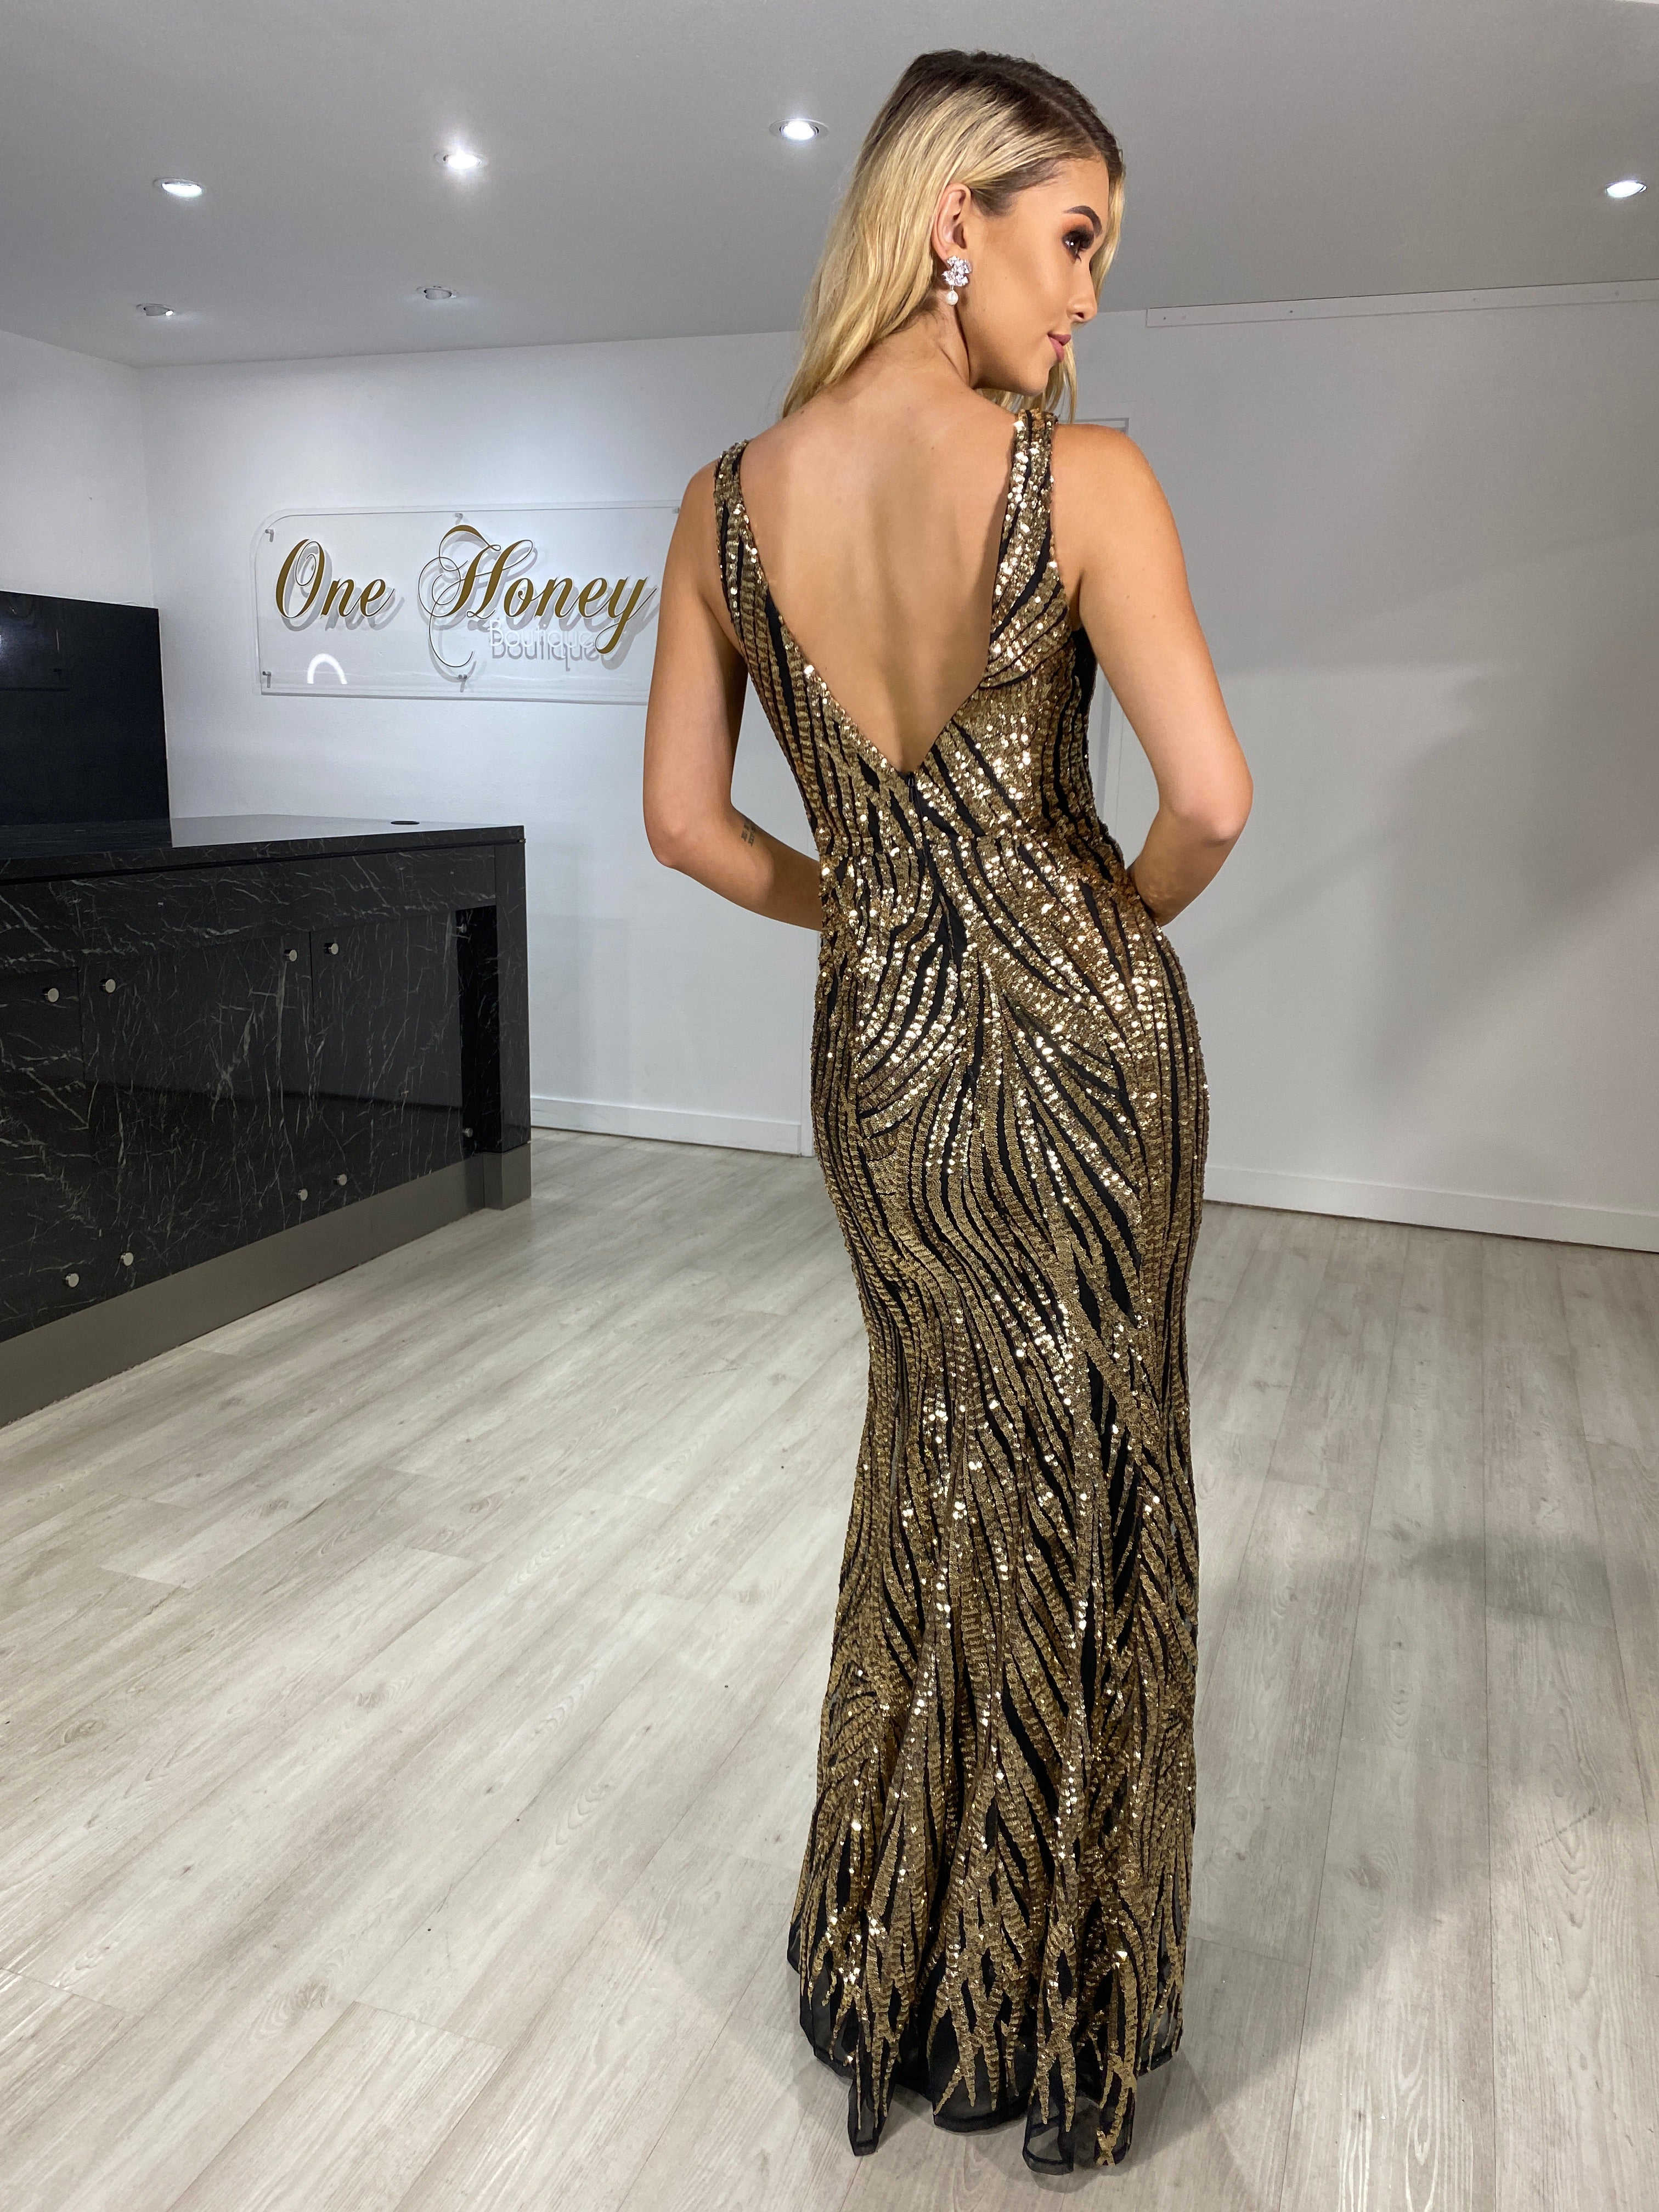 Black Chiffon Black Lace Prom Dress With Illusion Long Sleeves, Lace  Applique, And Empire Waist Floor Length Evening Formal Gown From  Lovemydress, $77.38 | DHgate.Com